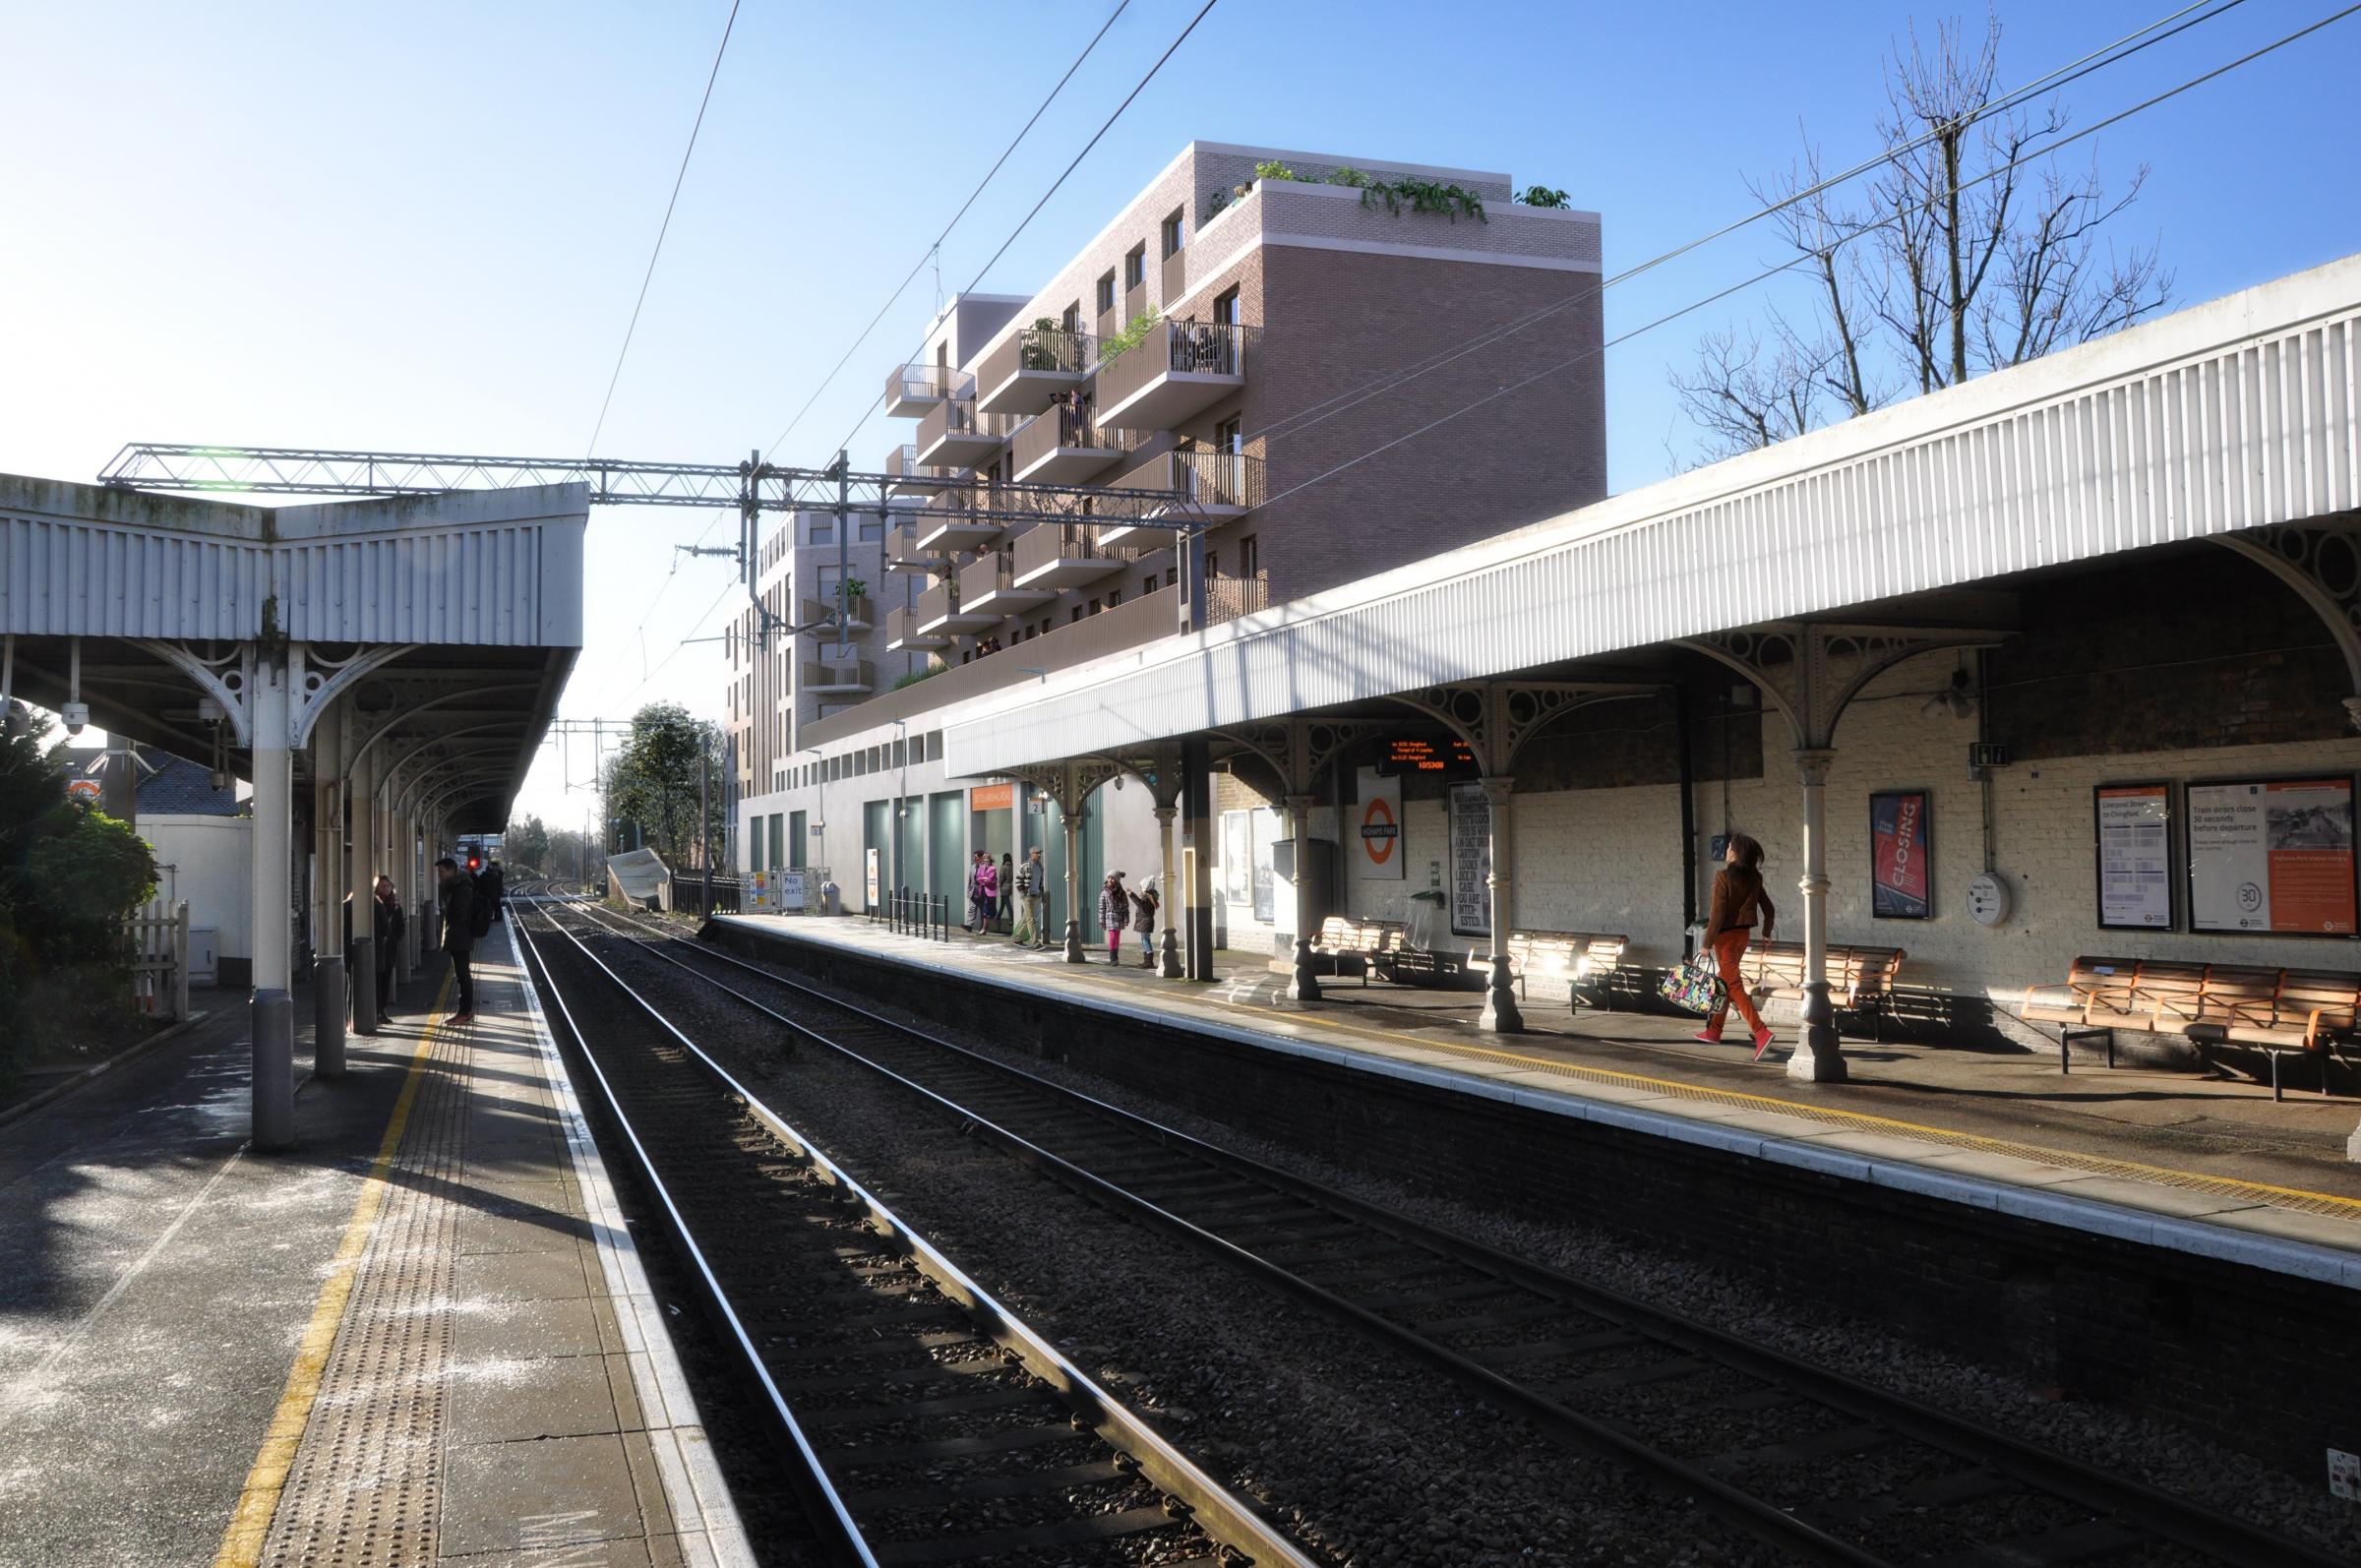 An artists impression of the proposed development from Highams Park station platform. Image: Stephen Davy Peter Smith Architects